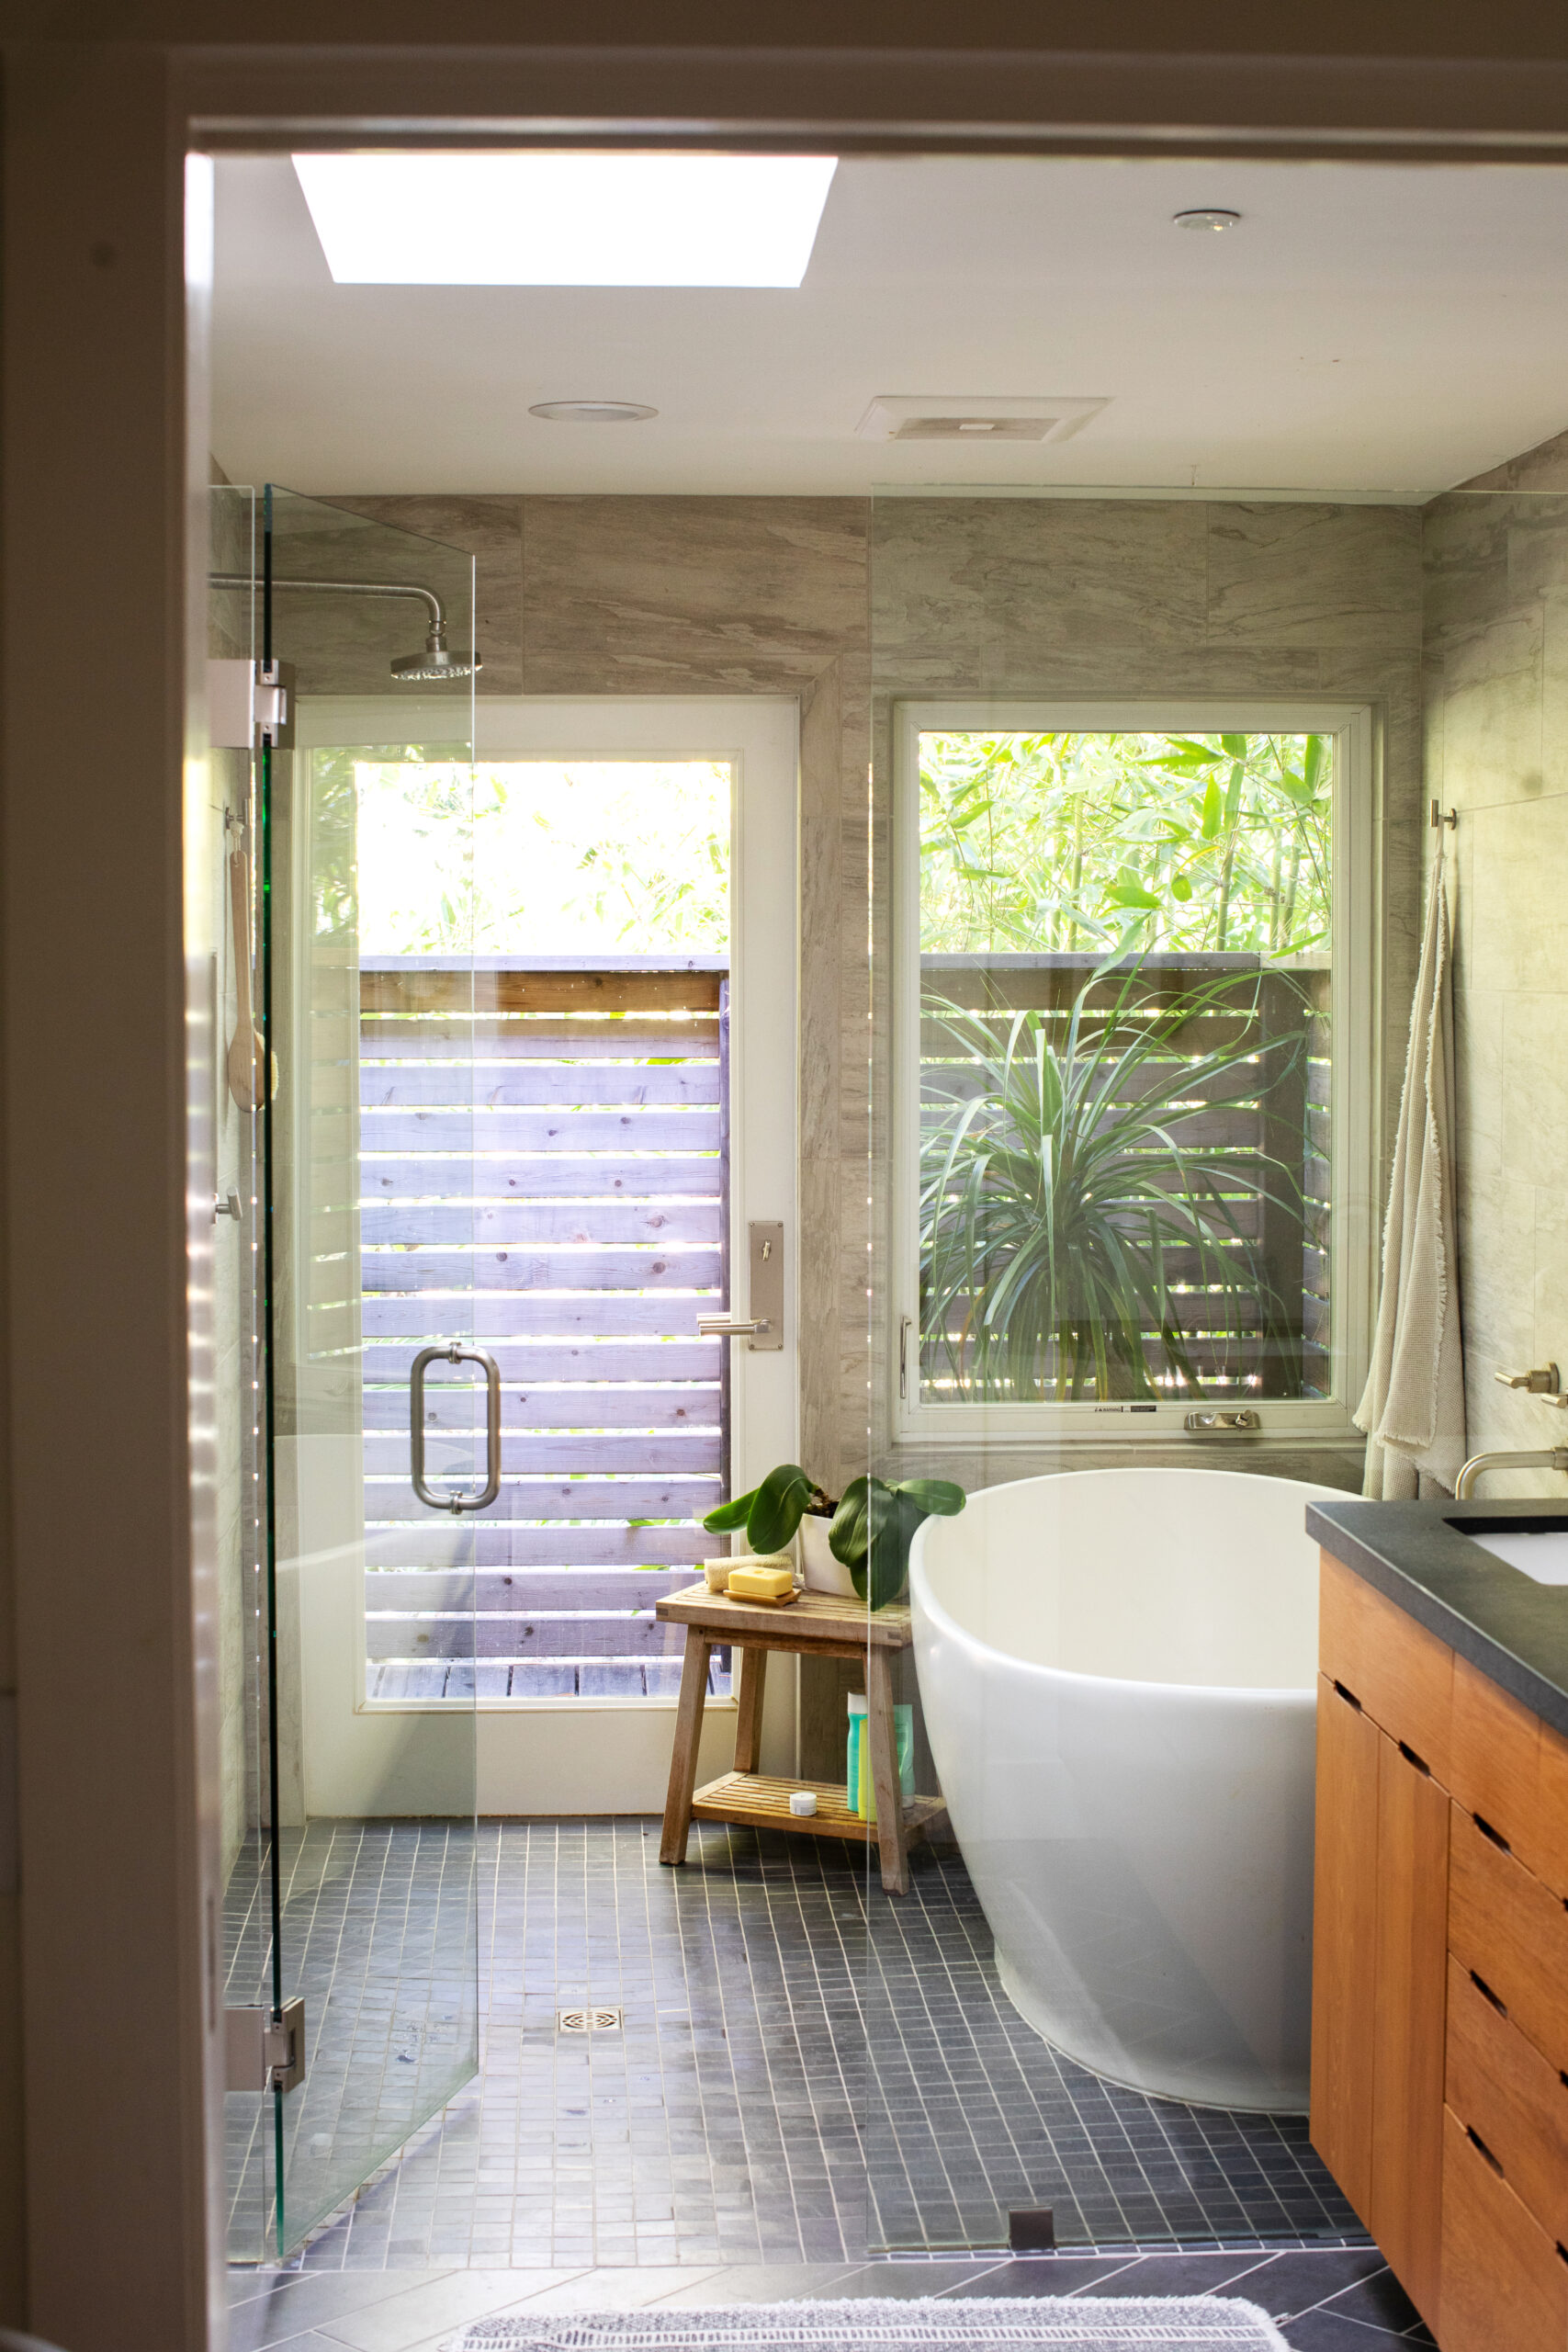 The primary bathroom, with a door that leads directly to the garden. (Eileen Roche)